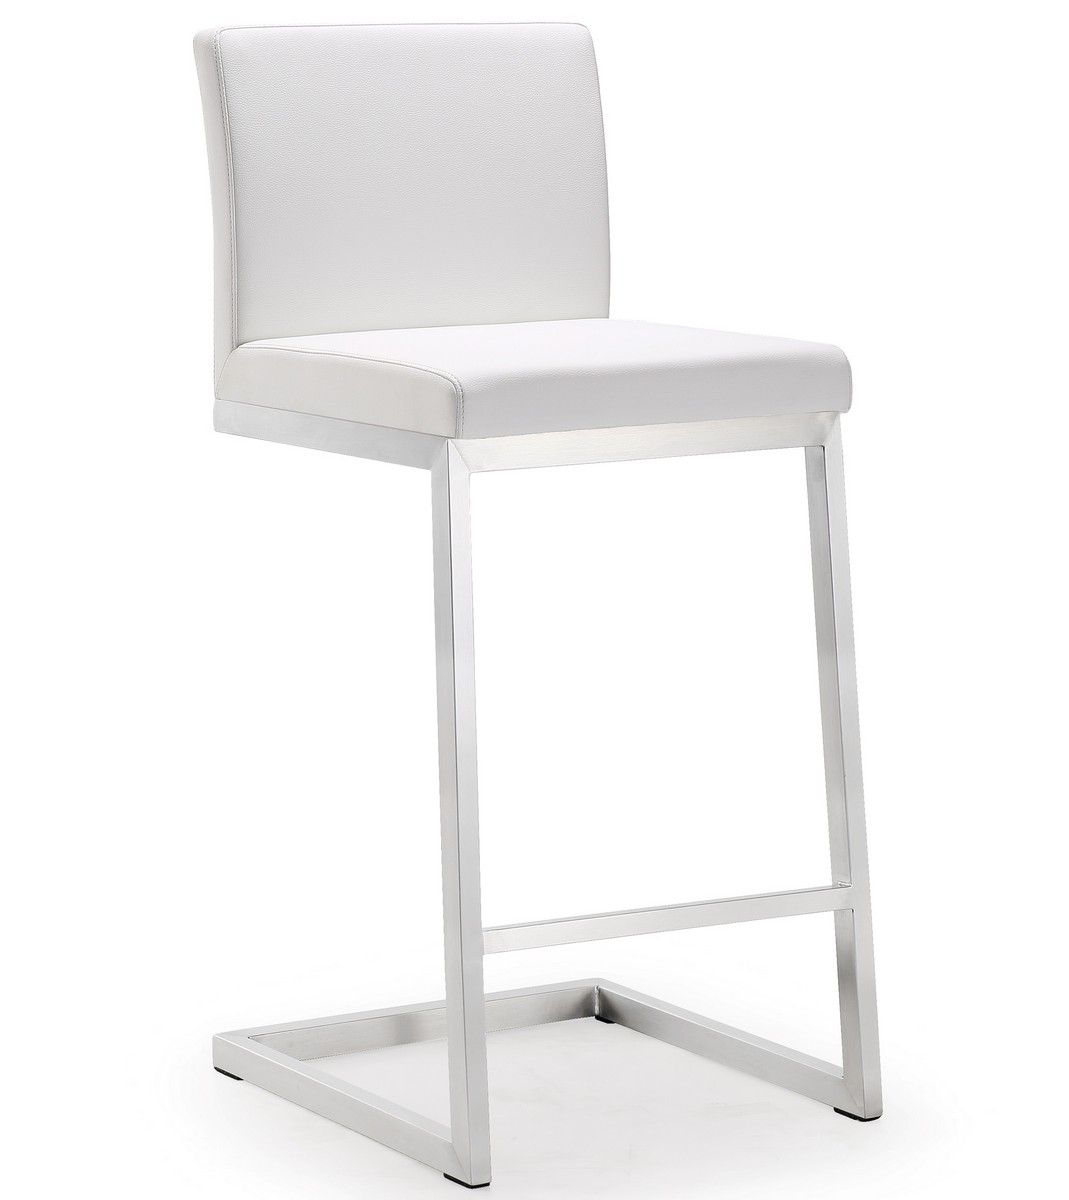 TOV Furniture Parma White Stainless Steel Counter Stool - Set of 2